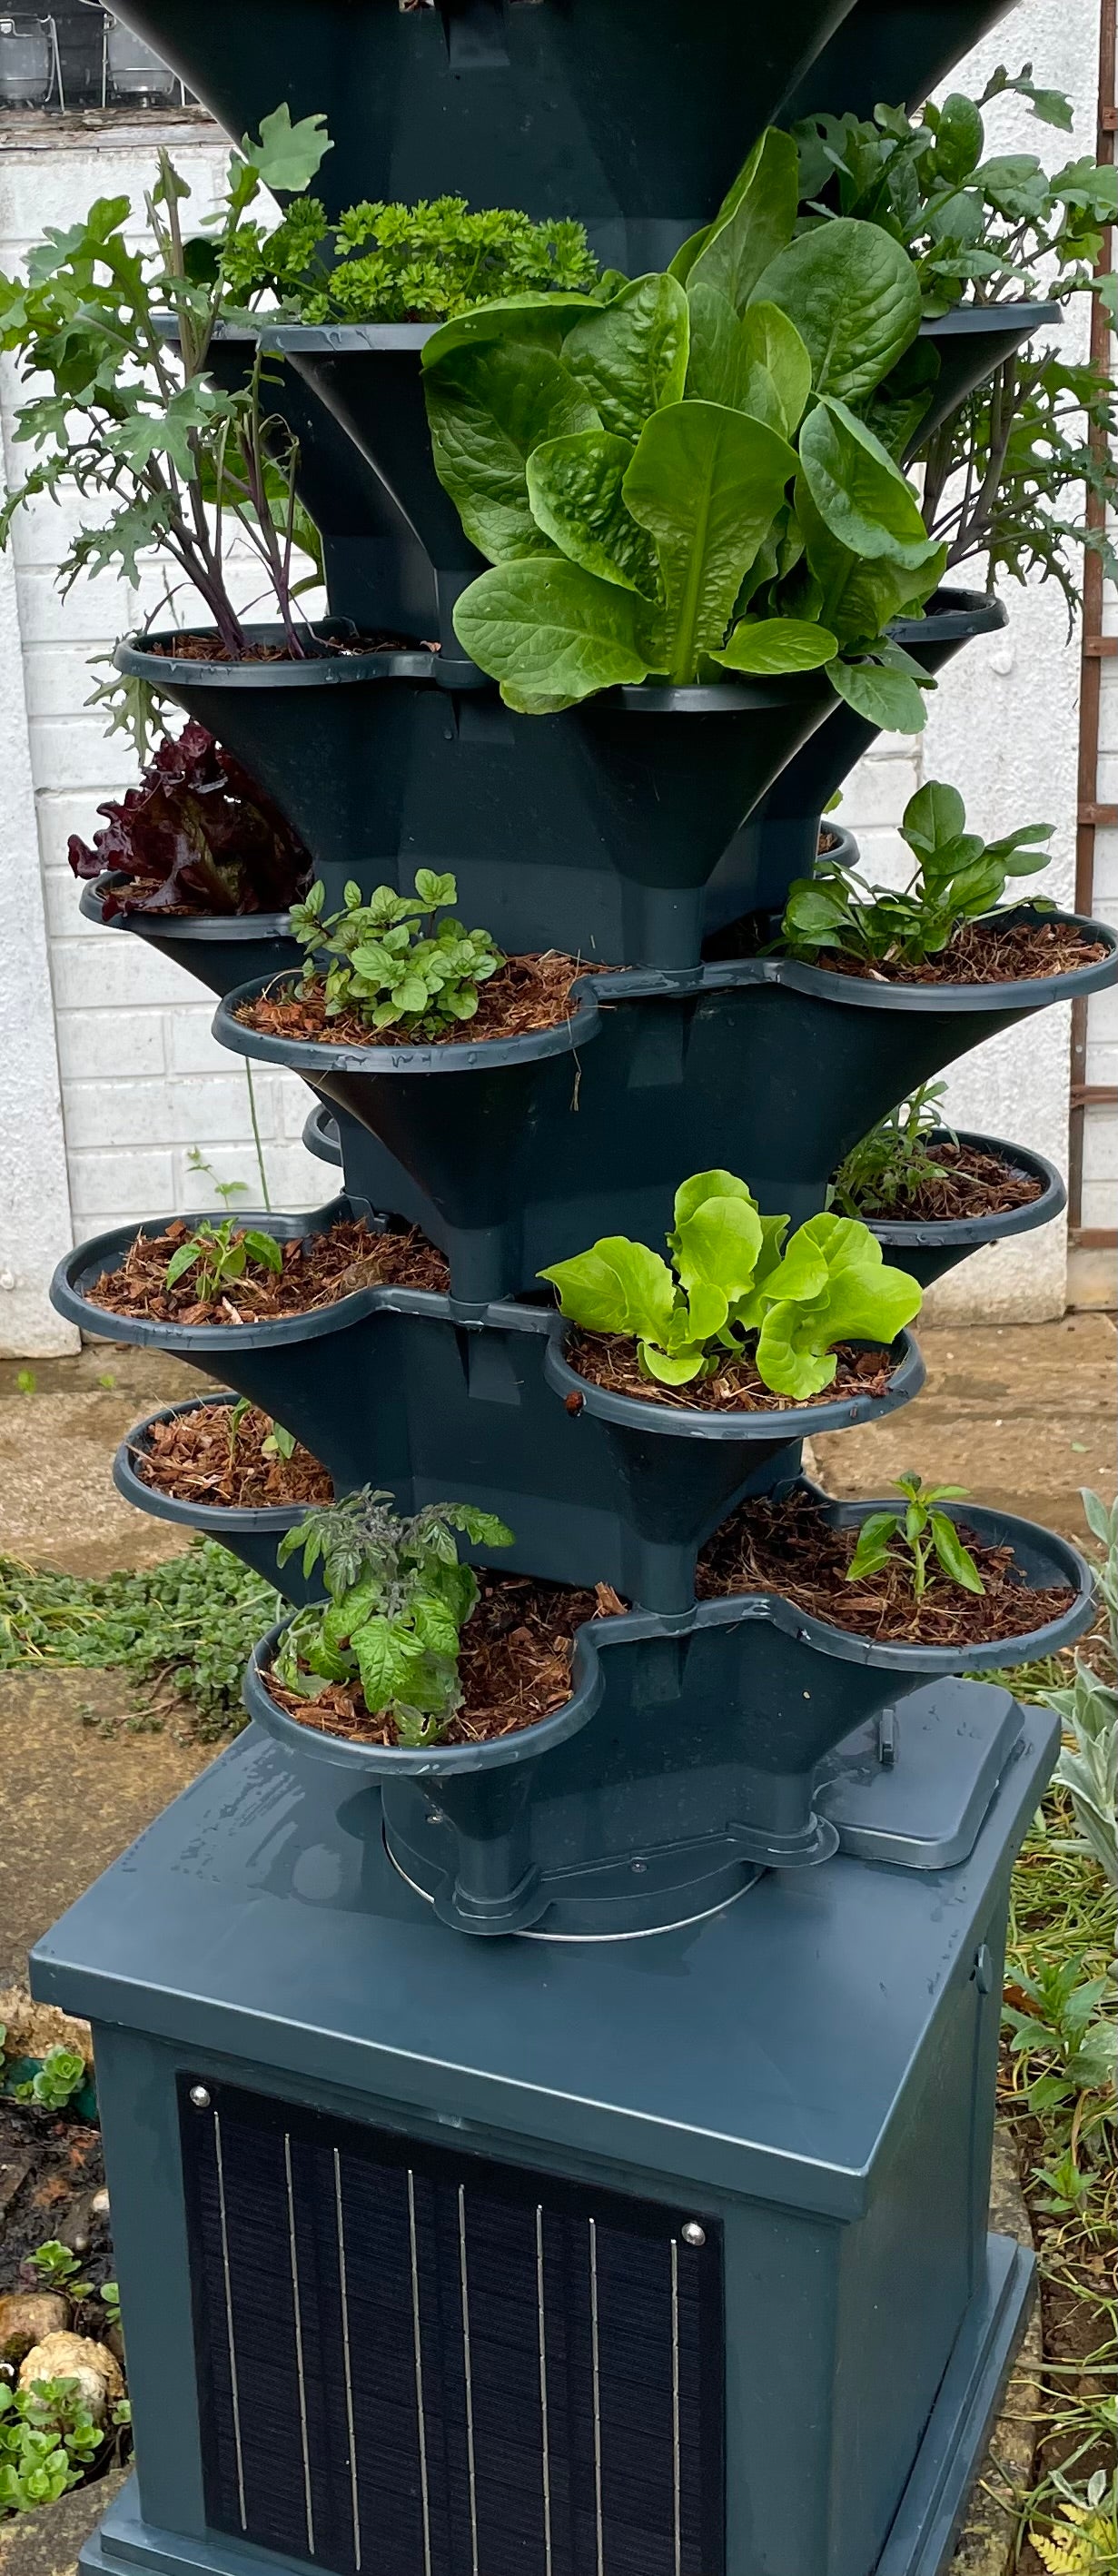 Acqua Garden 2 - Automated Solar Powered Self-Watering Vertical Growing System - 'Garden in a Box'